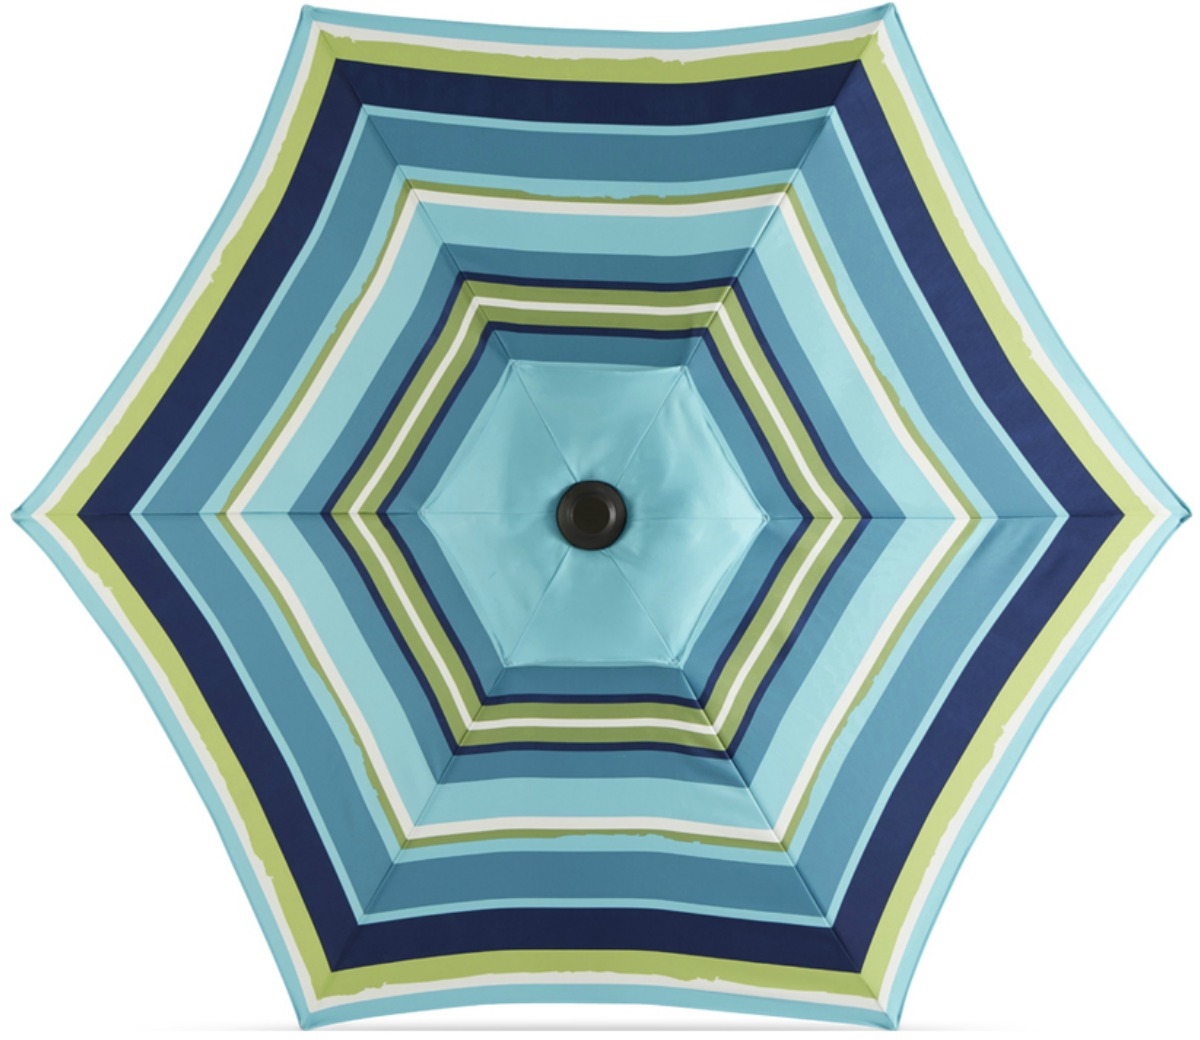 Top view of a blue striped patio umbrella from Lowe's